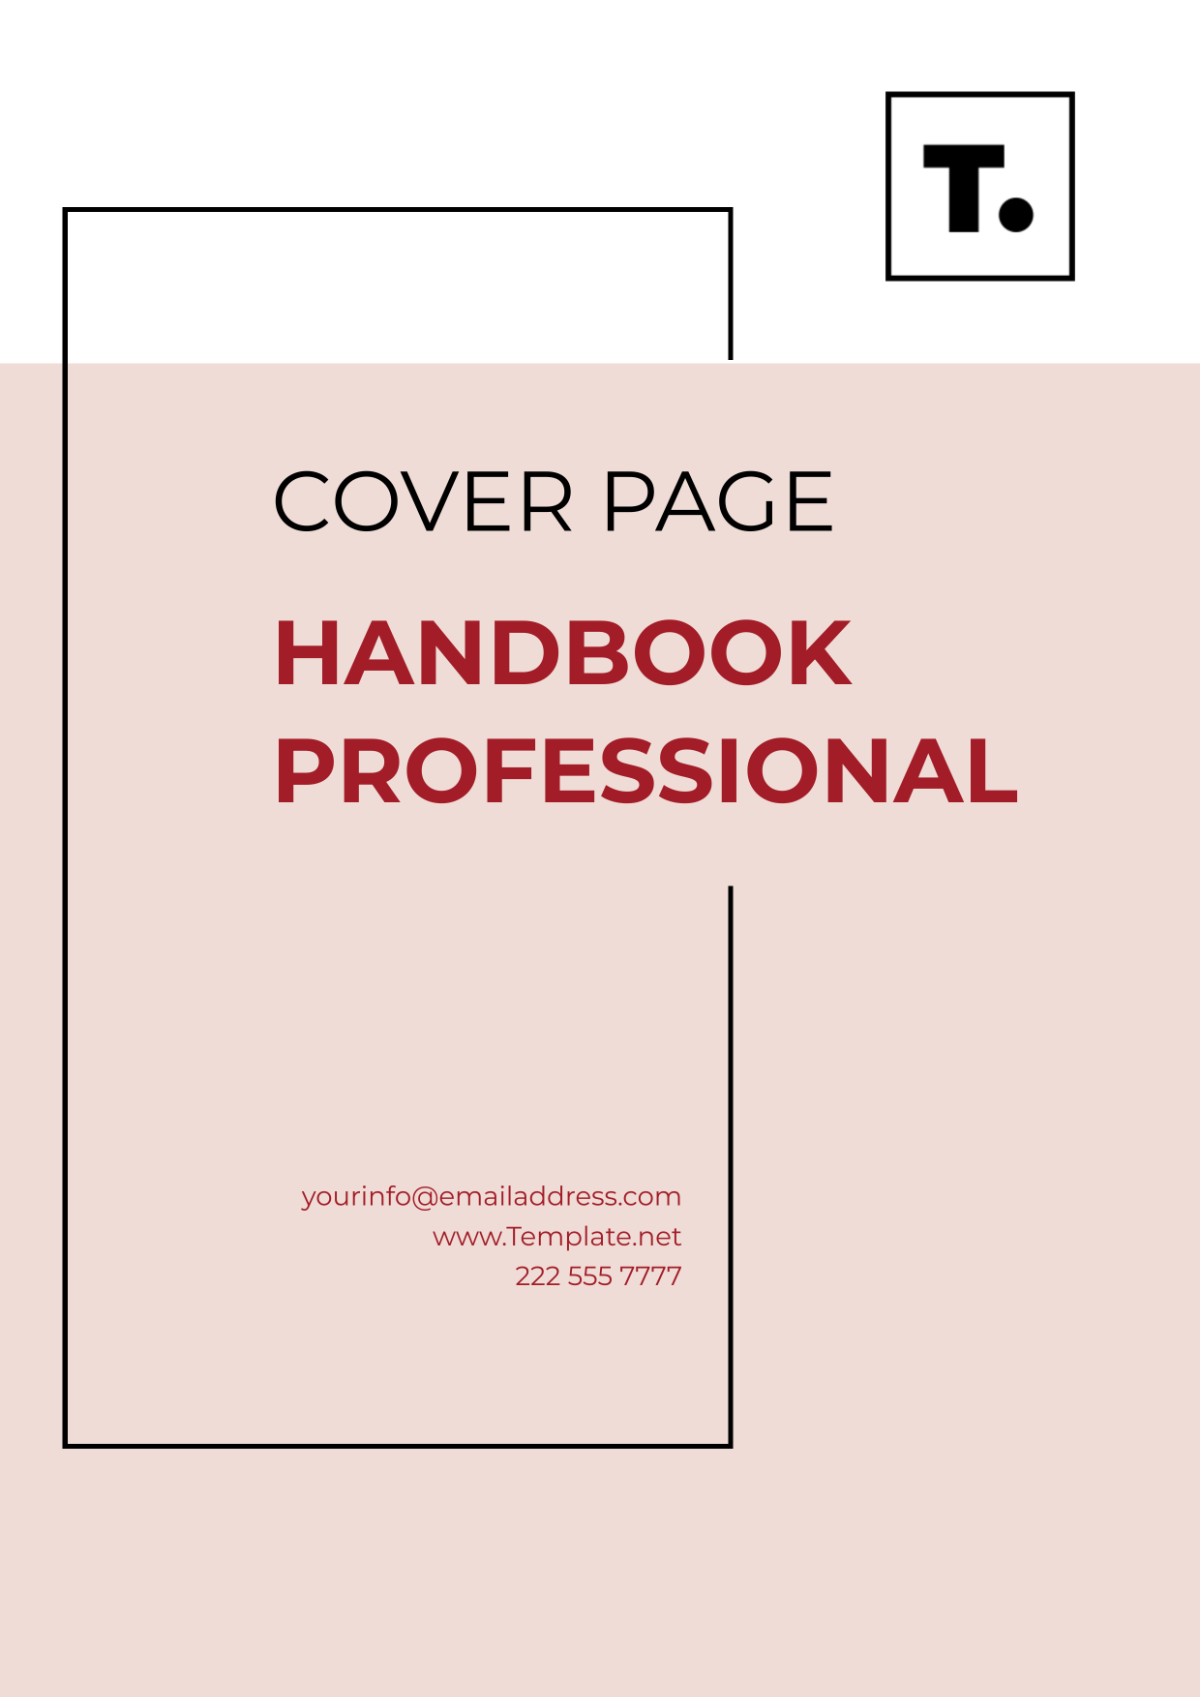 Handbook Professional Cover Page